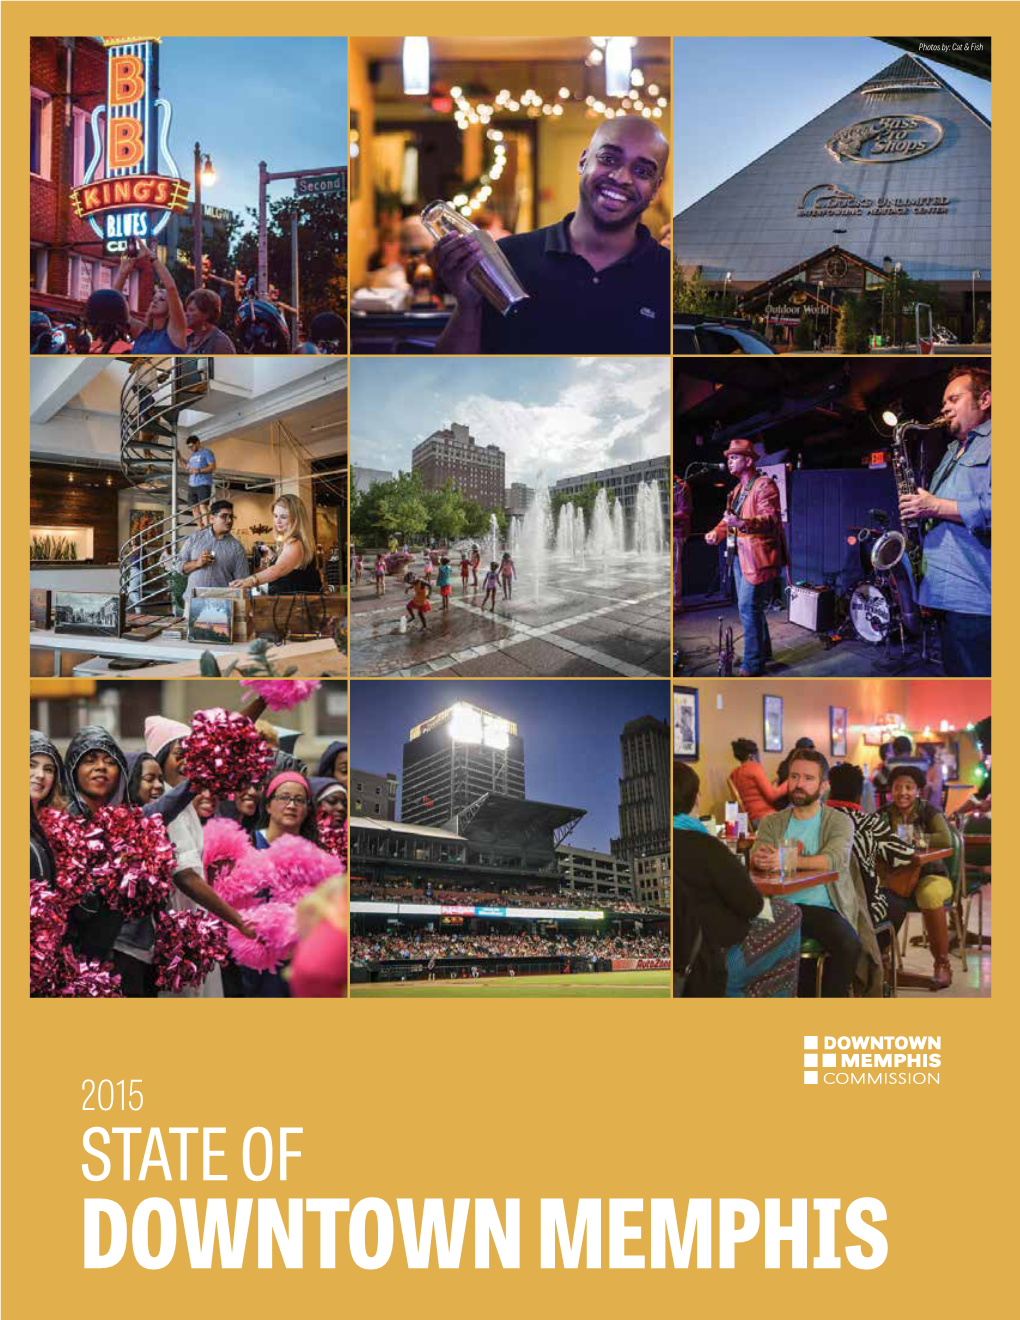 Downtown Memphis Commission's State of Downtown Report